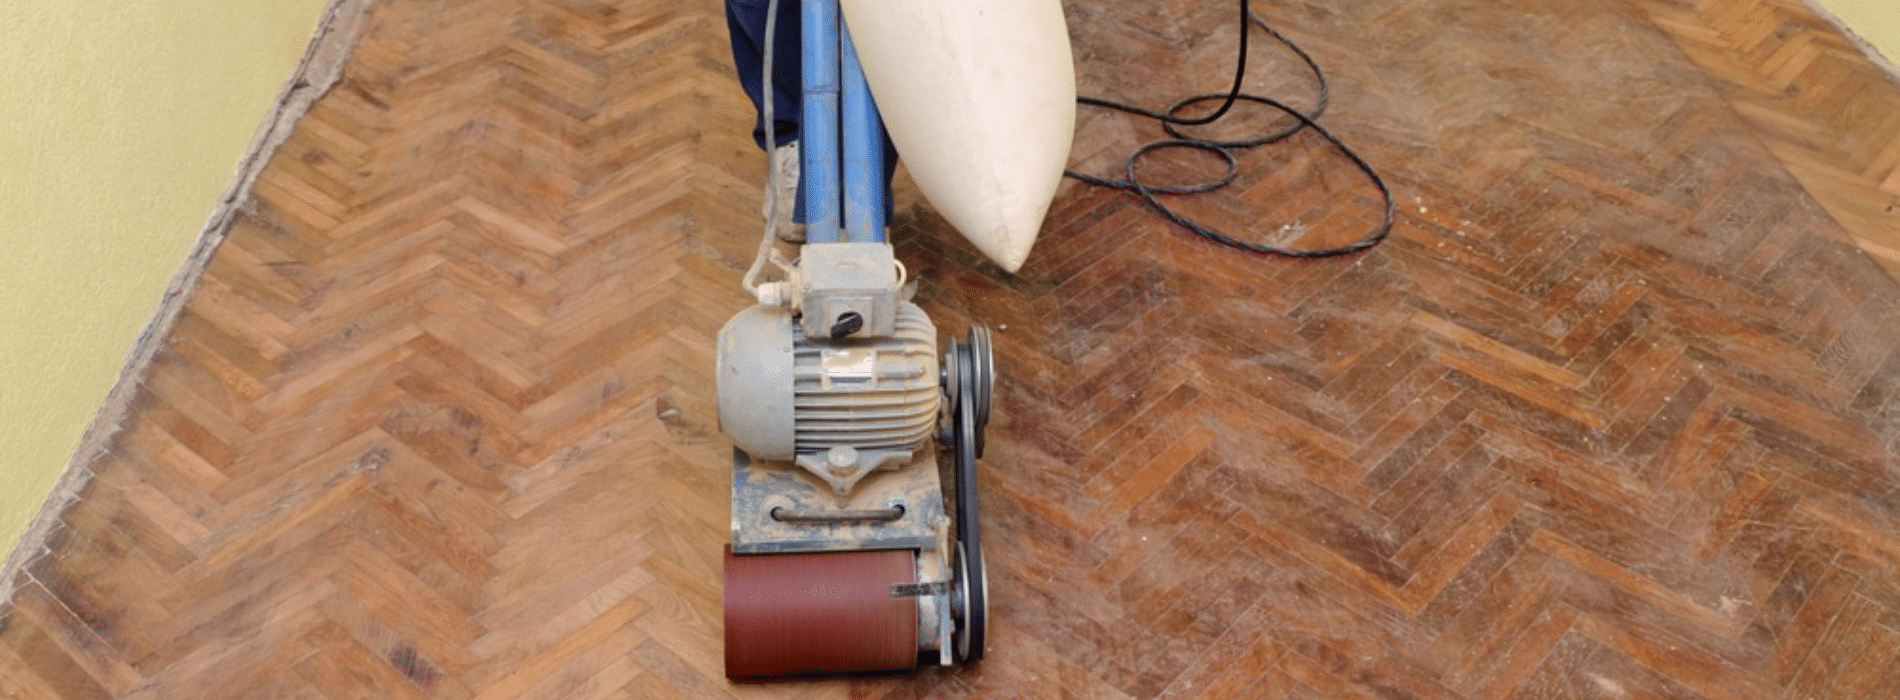 In Greater London (West), Mr Sander® are using a Bona Scorpion drum sander (200 mm, 1.5 kW, 240 V, 50 Hz) connected to a dust extraction system with a HEPA filter for sanding a herringbone floor. This ensures a clean and efficient result, providing high-quality floor sanding services.